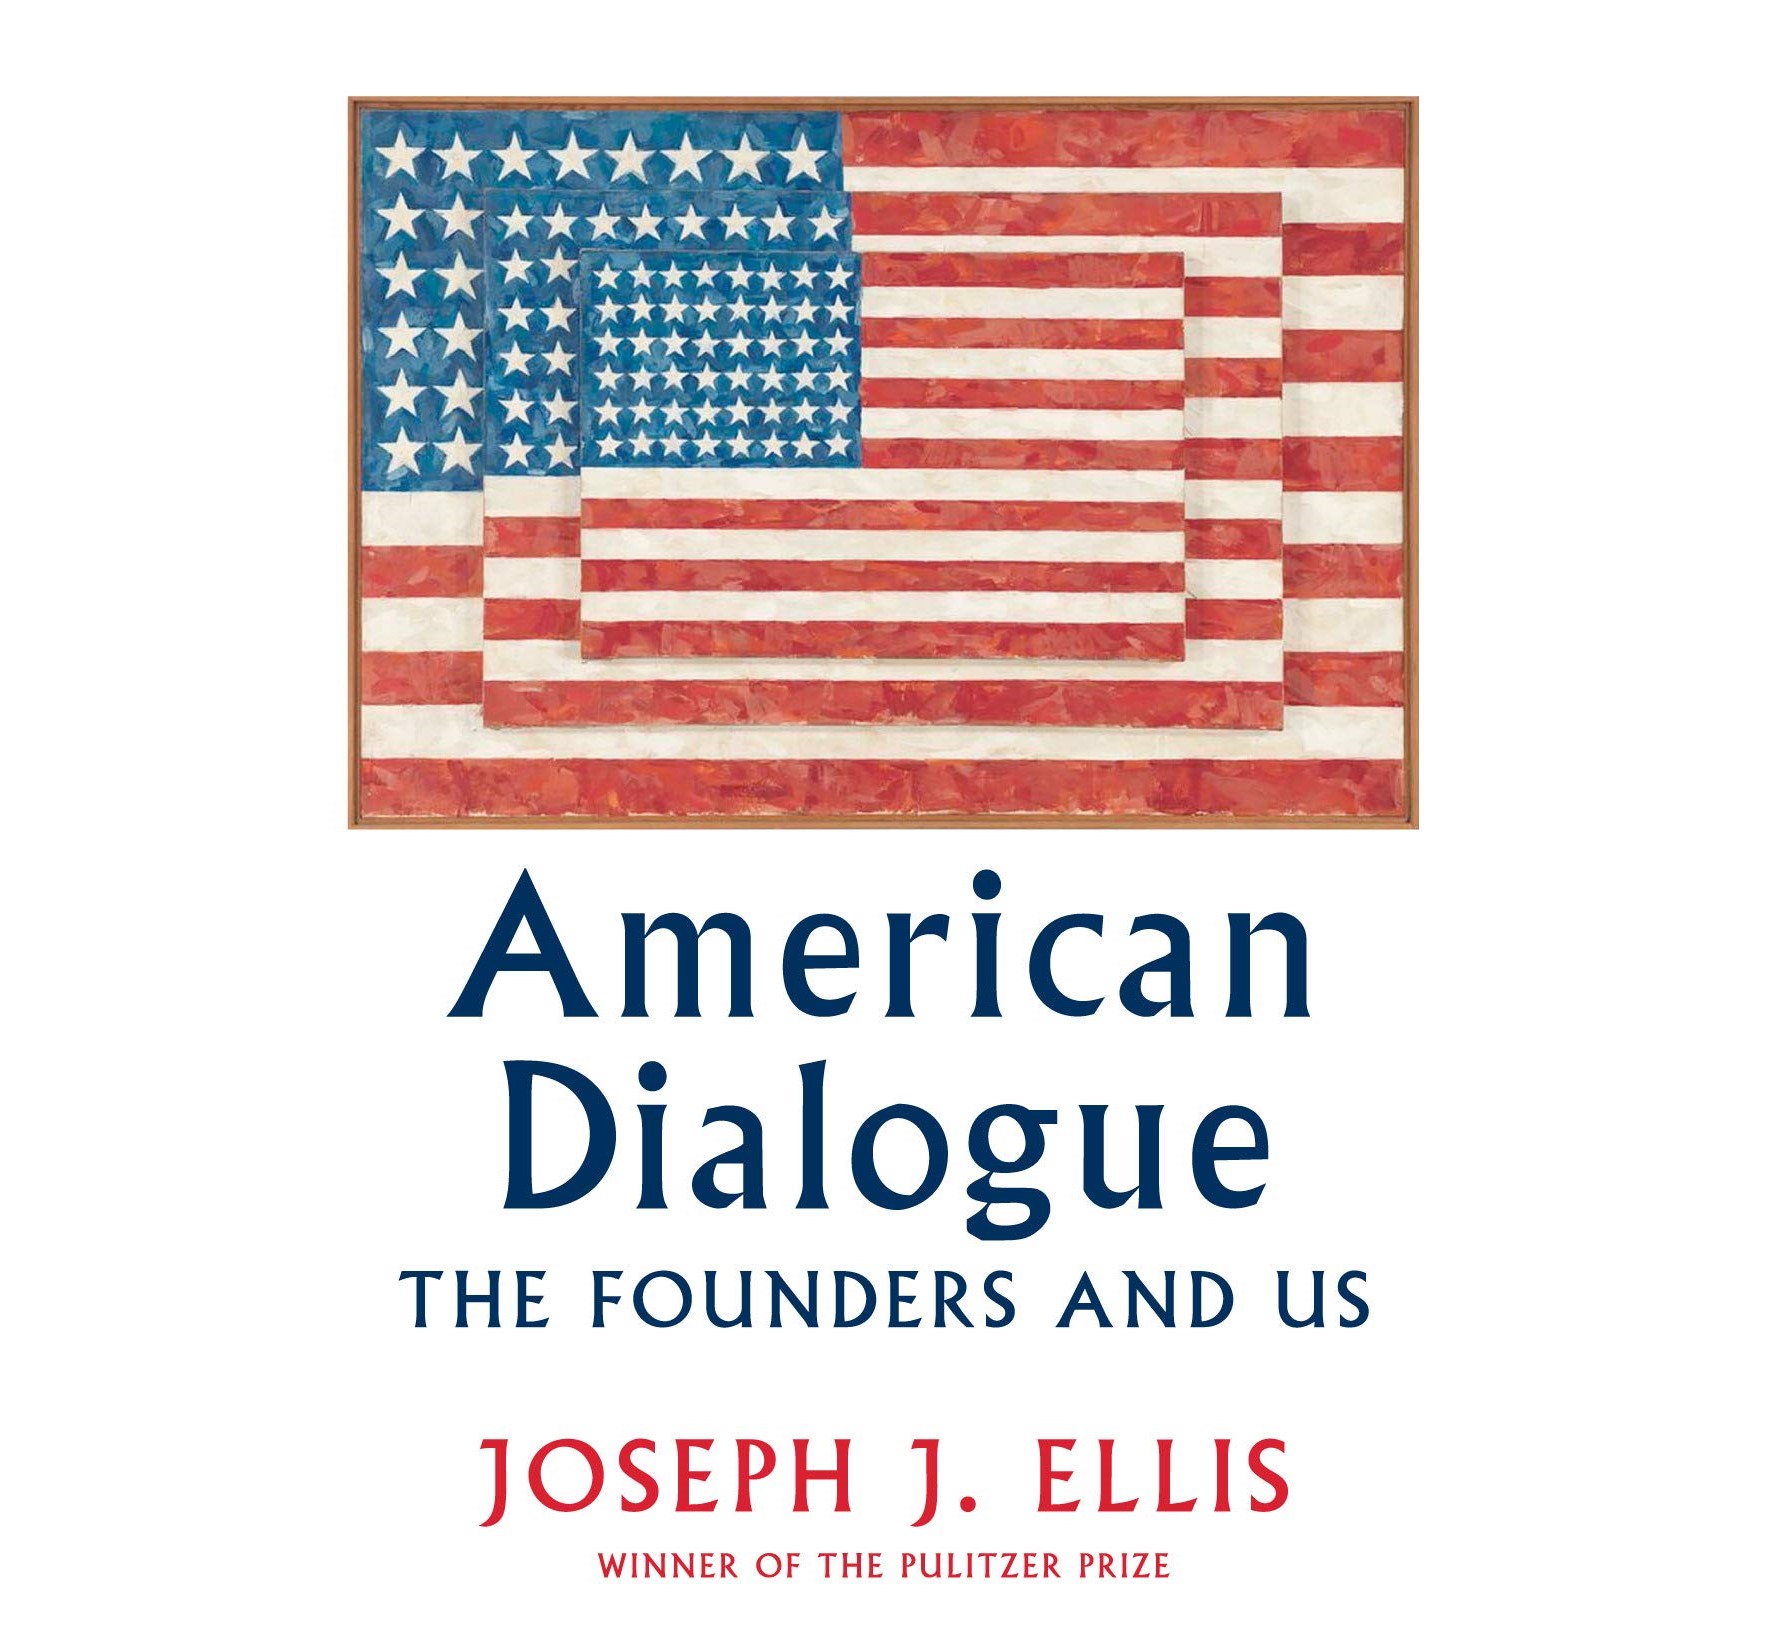 Bookcover for American Dialogue by Joseph J. Ellis